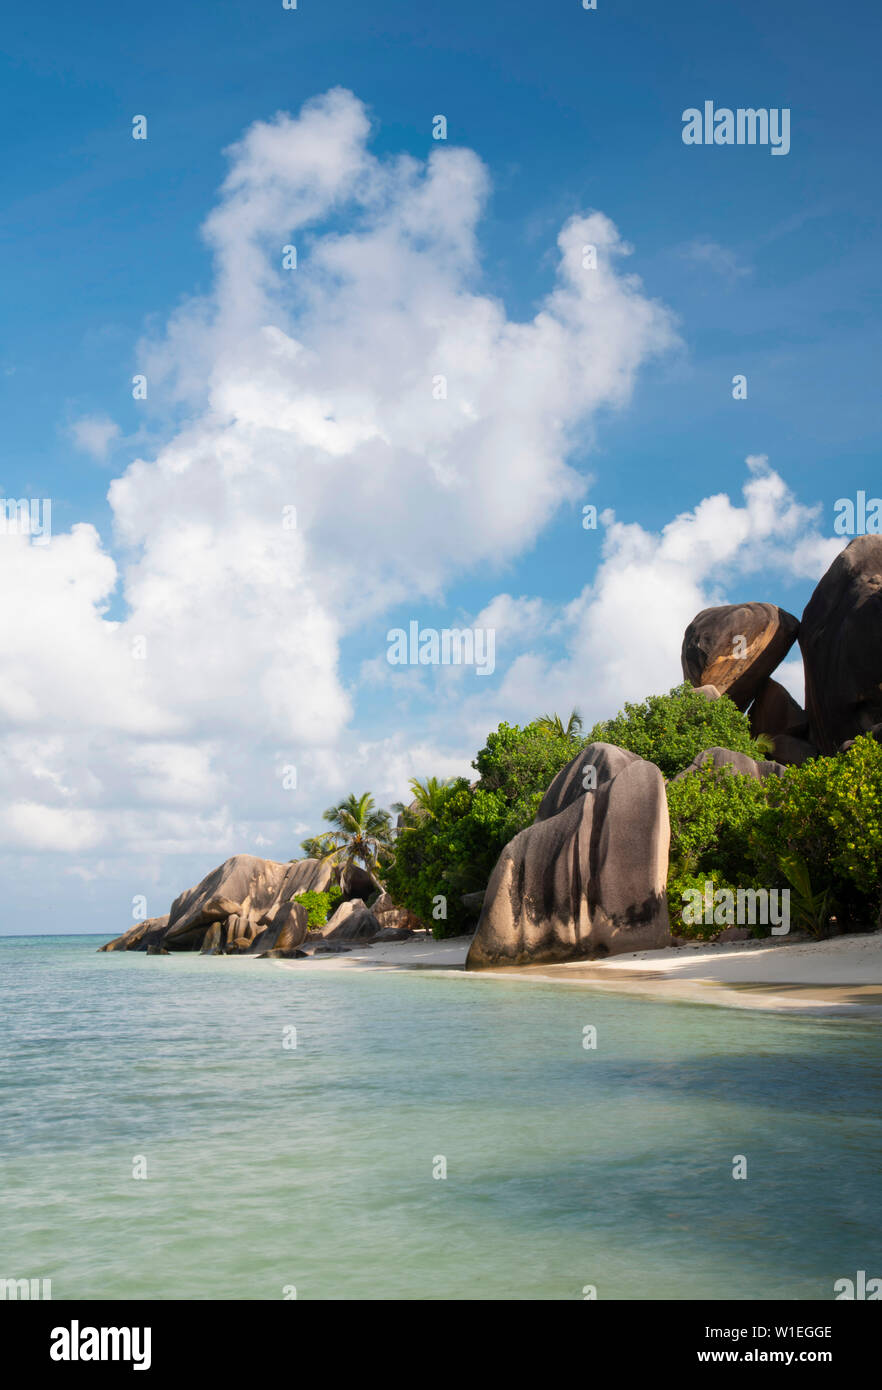 Distinctive large granite boulders and palm trees on Anse Source d'Argent, La Digue, Seychelles, Indian Ocean, Africa Stock Photo